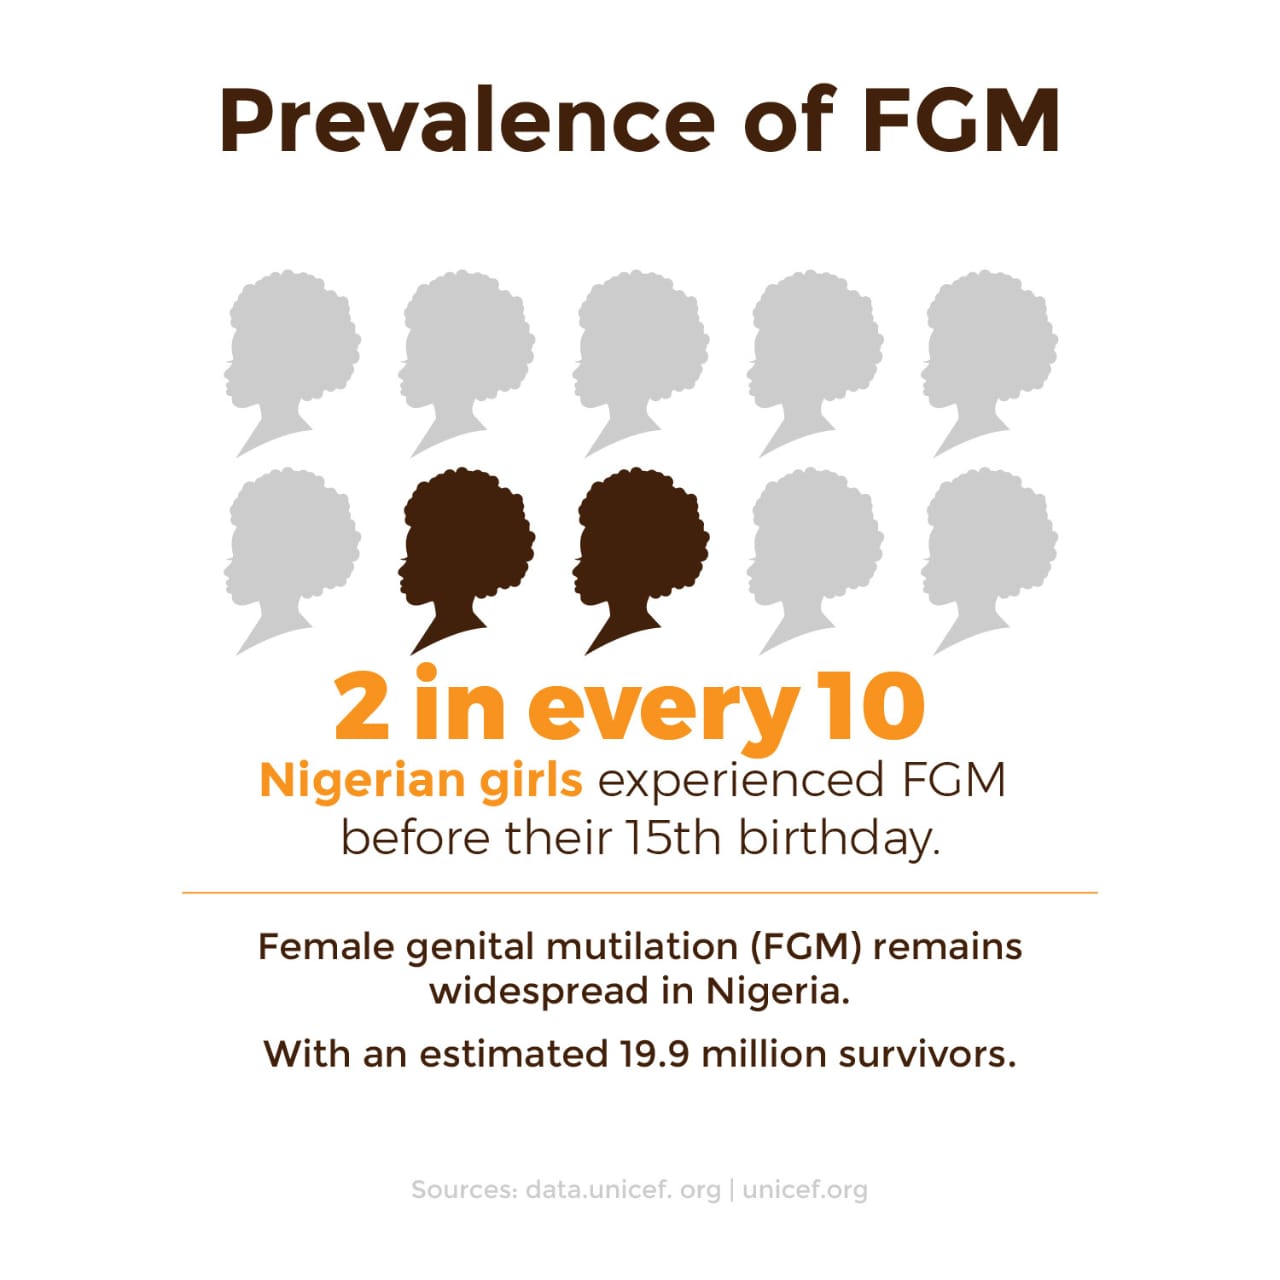 Data on the number of Female Genital Mutilation survivors in Nigeria